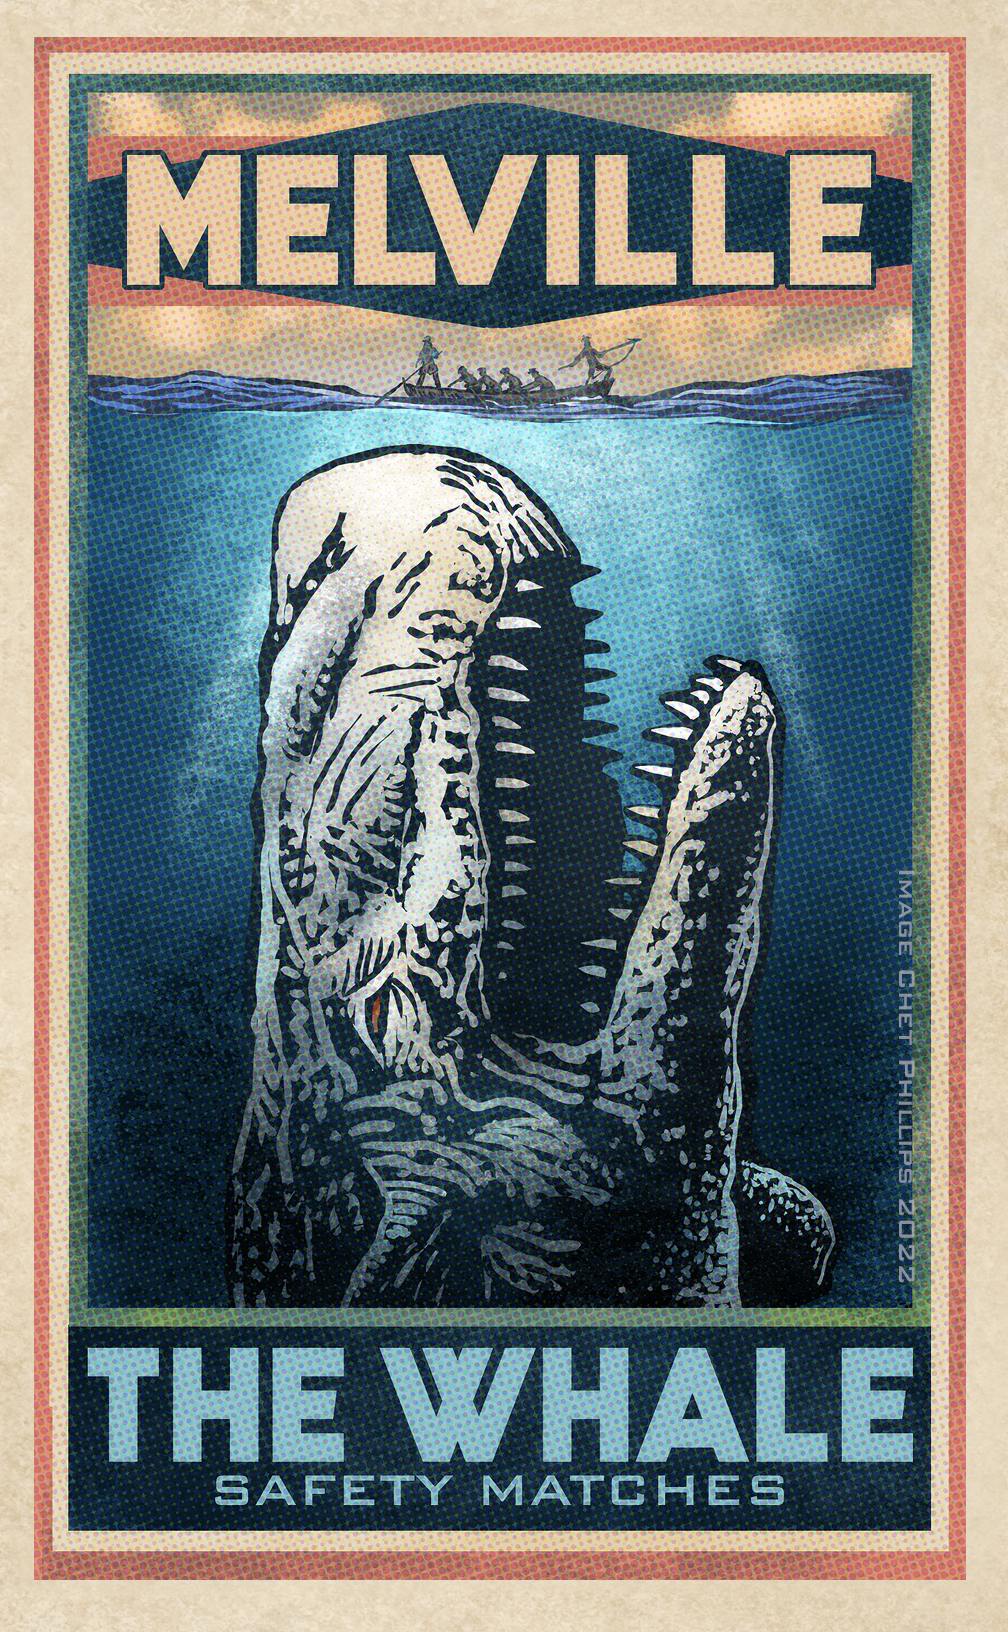 The Whale Brand 5" x 7" matted Matchbox print